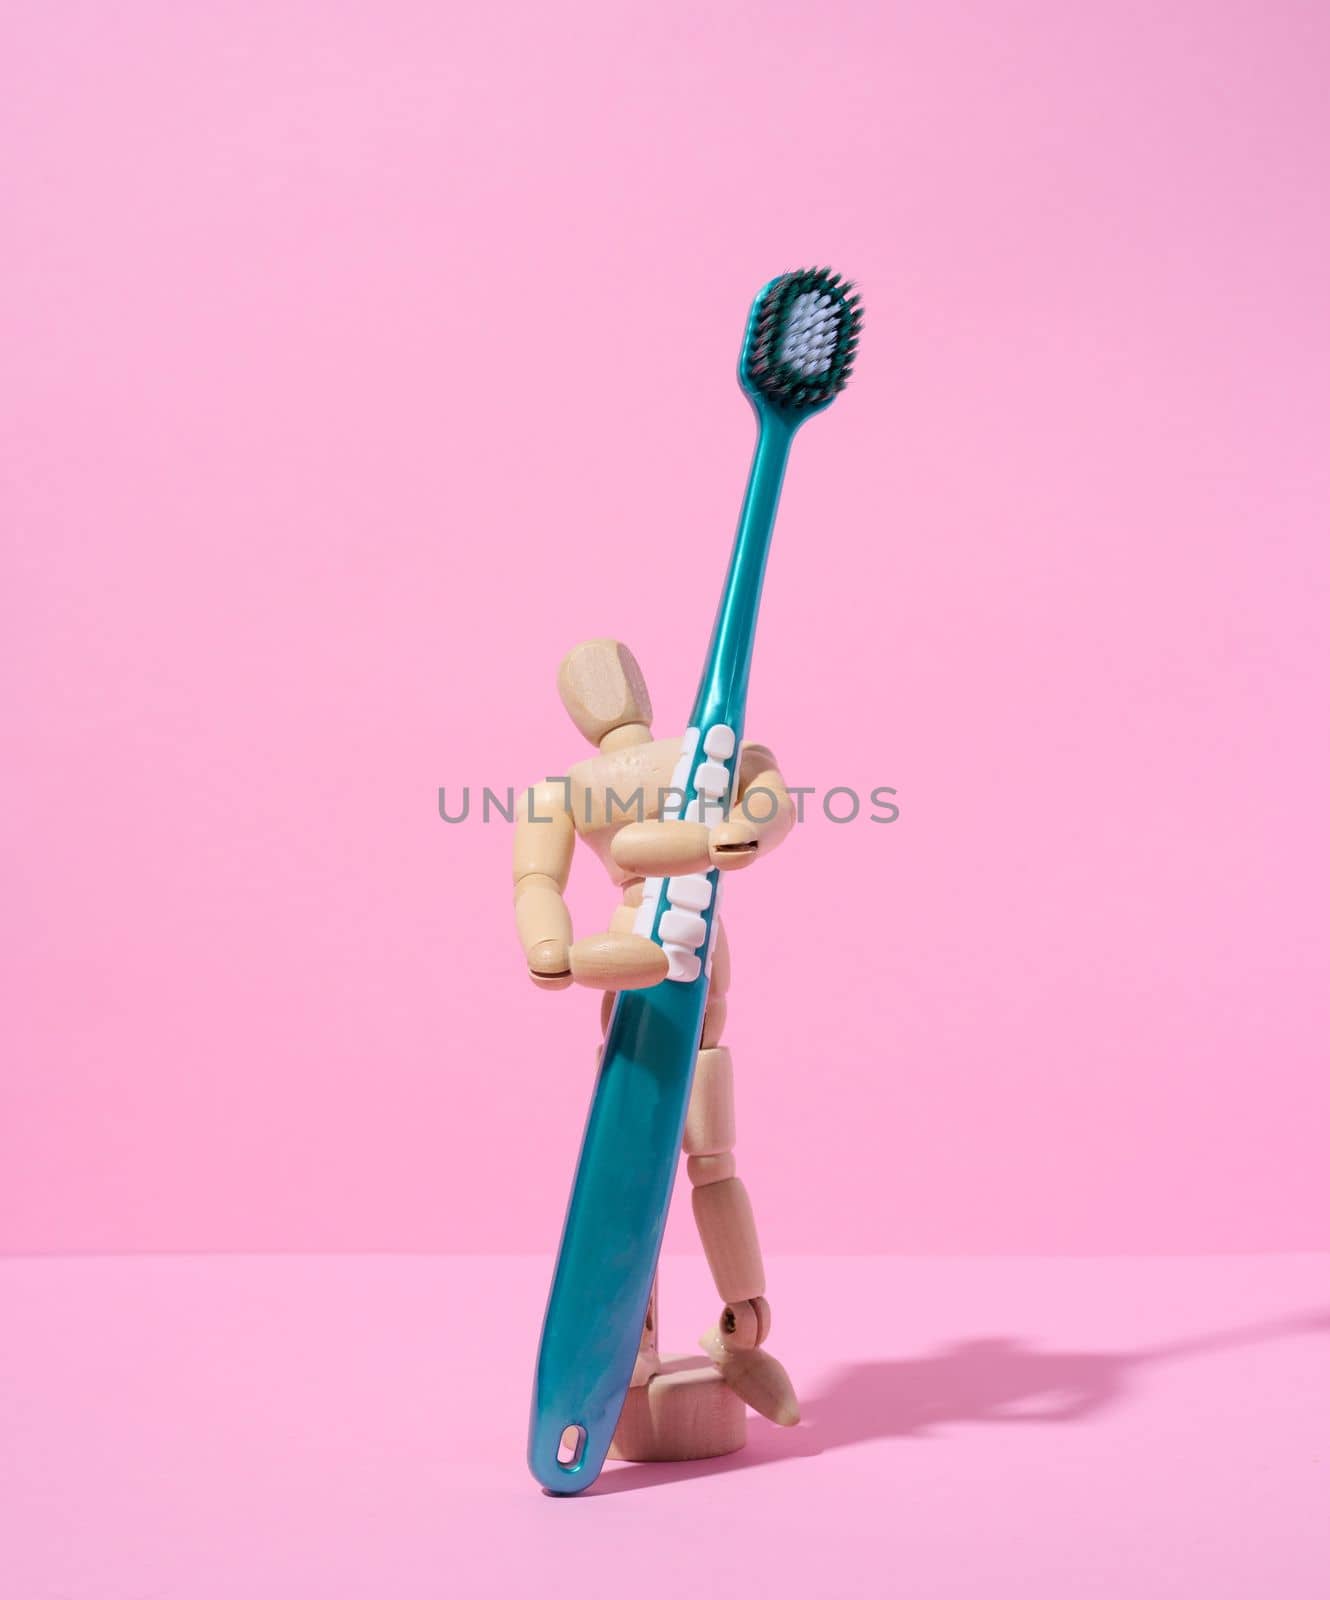 Wooden puppet toy holding a toothbrush on a pink background by ndanko